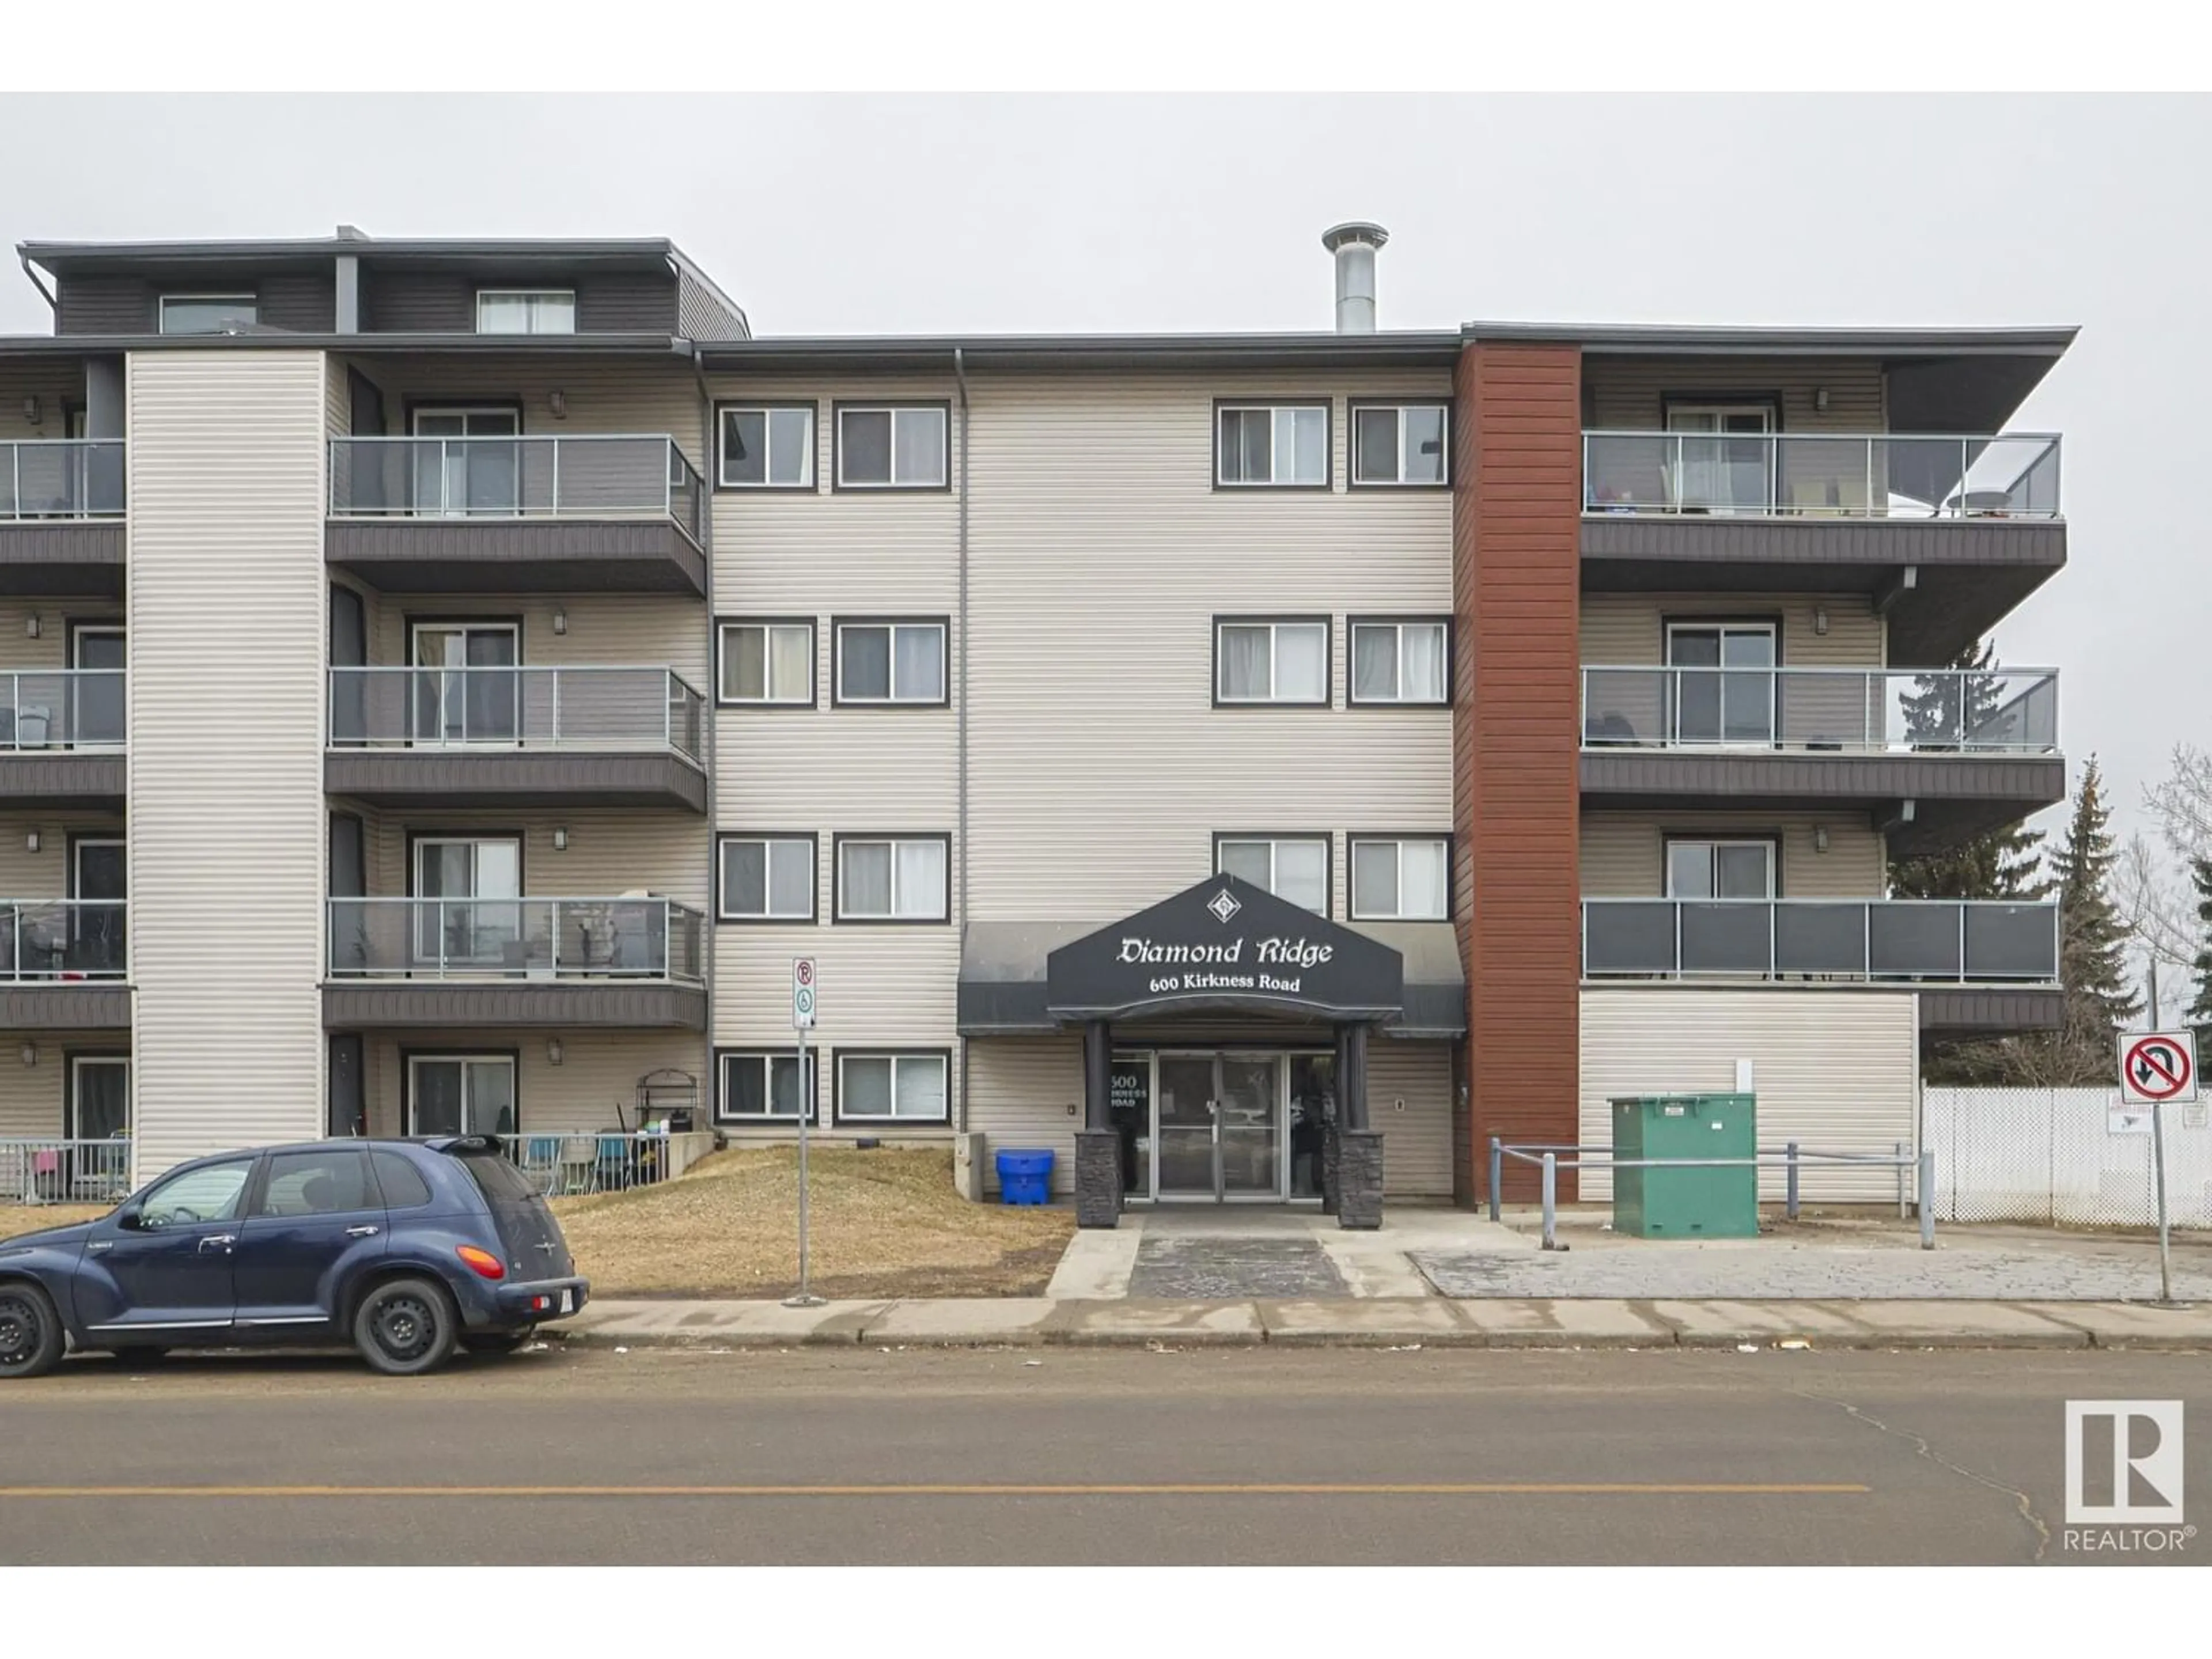 A pic from exterior of the house or condo for #314 600 KIRKNESS RD NW, Edmonton Alberta T5Y2H5